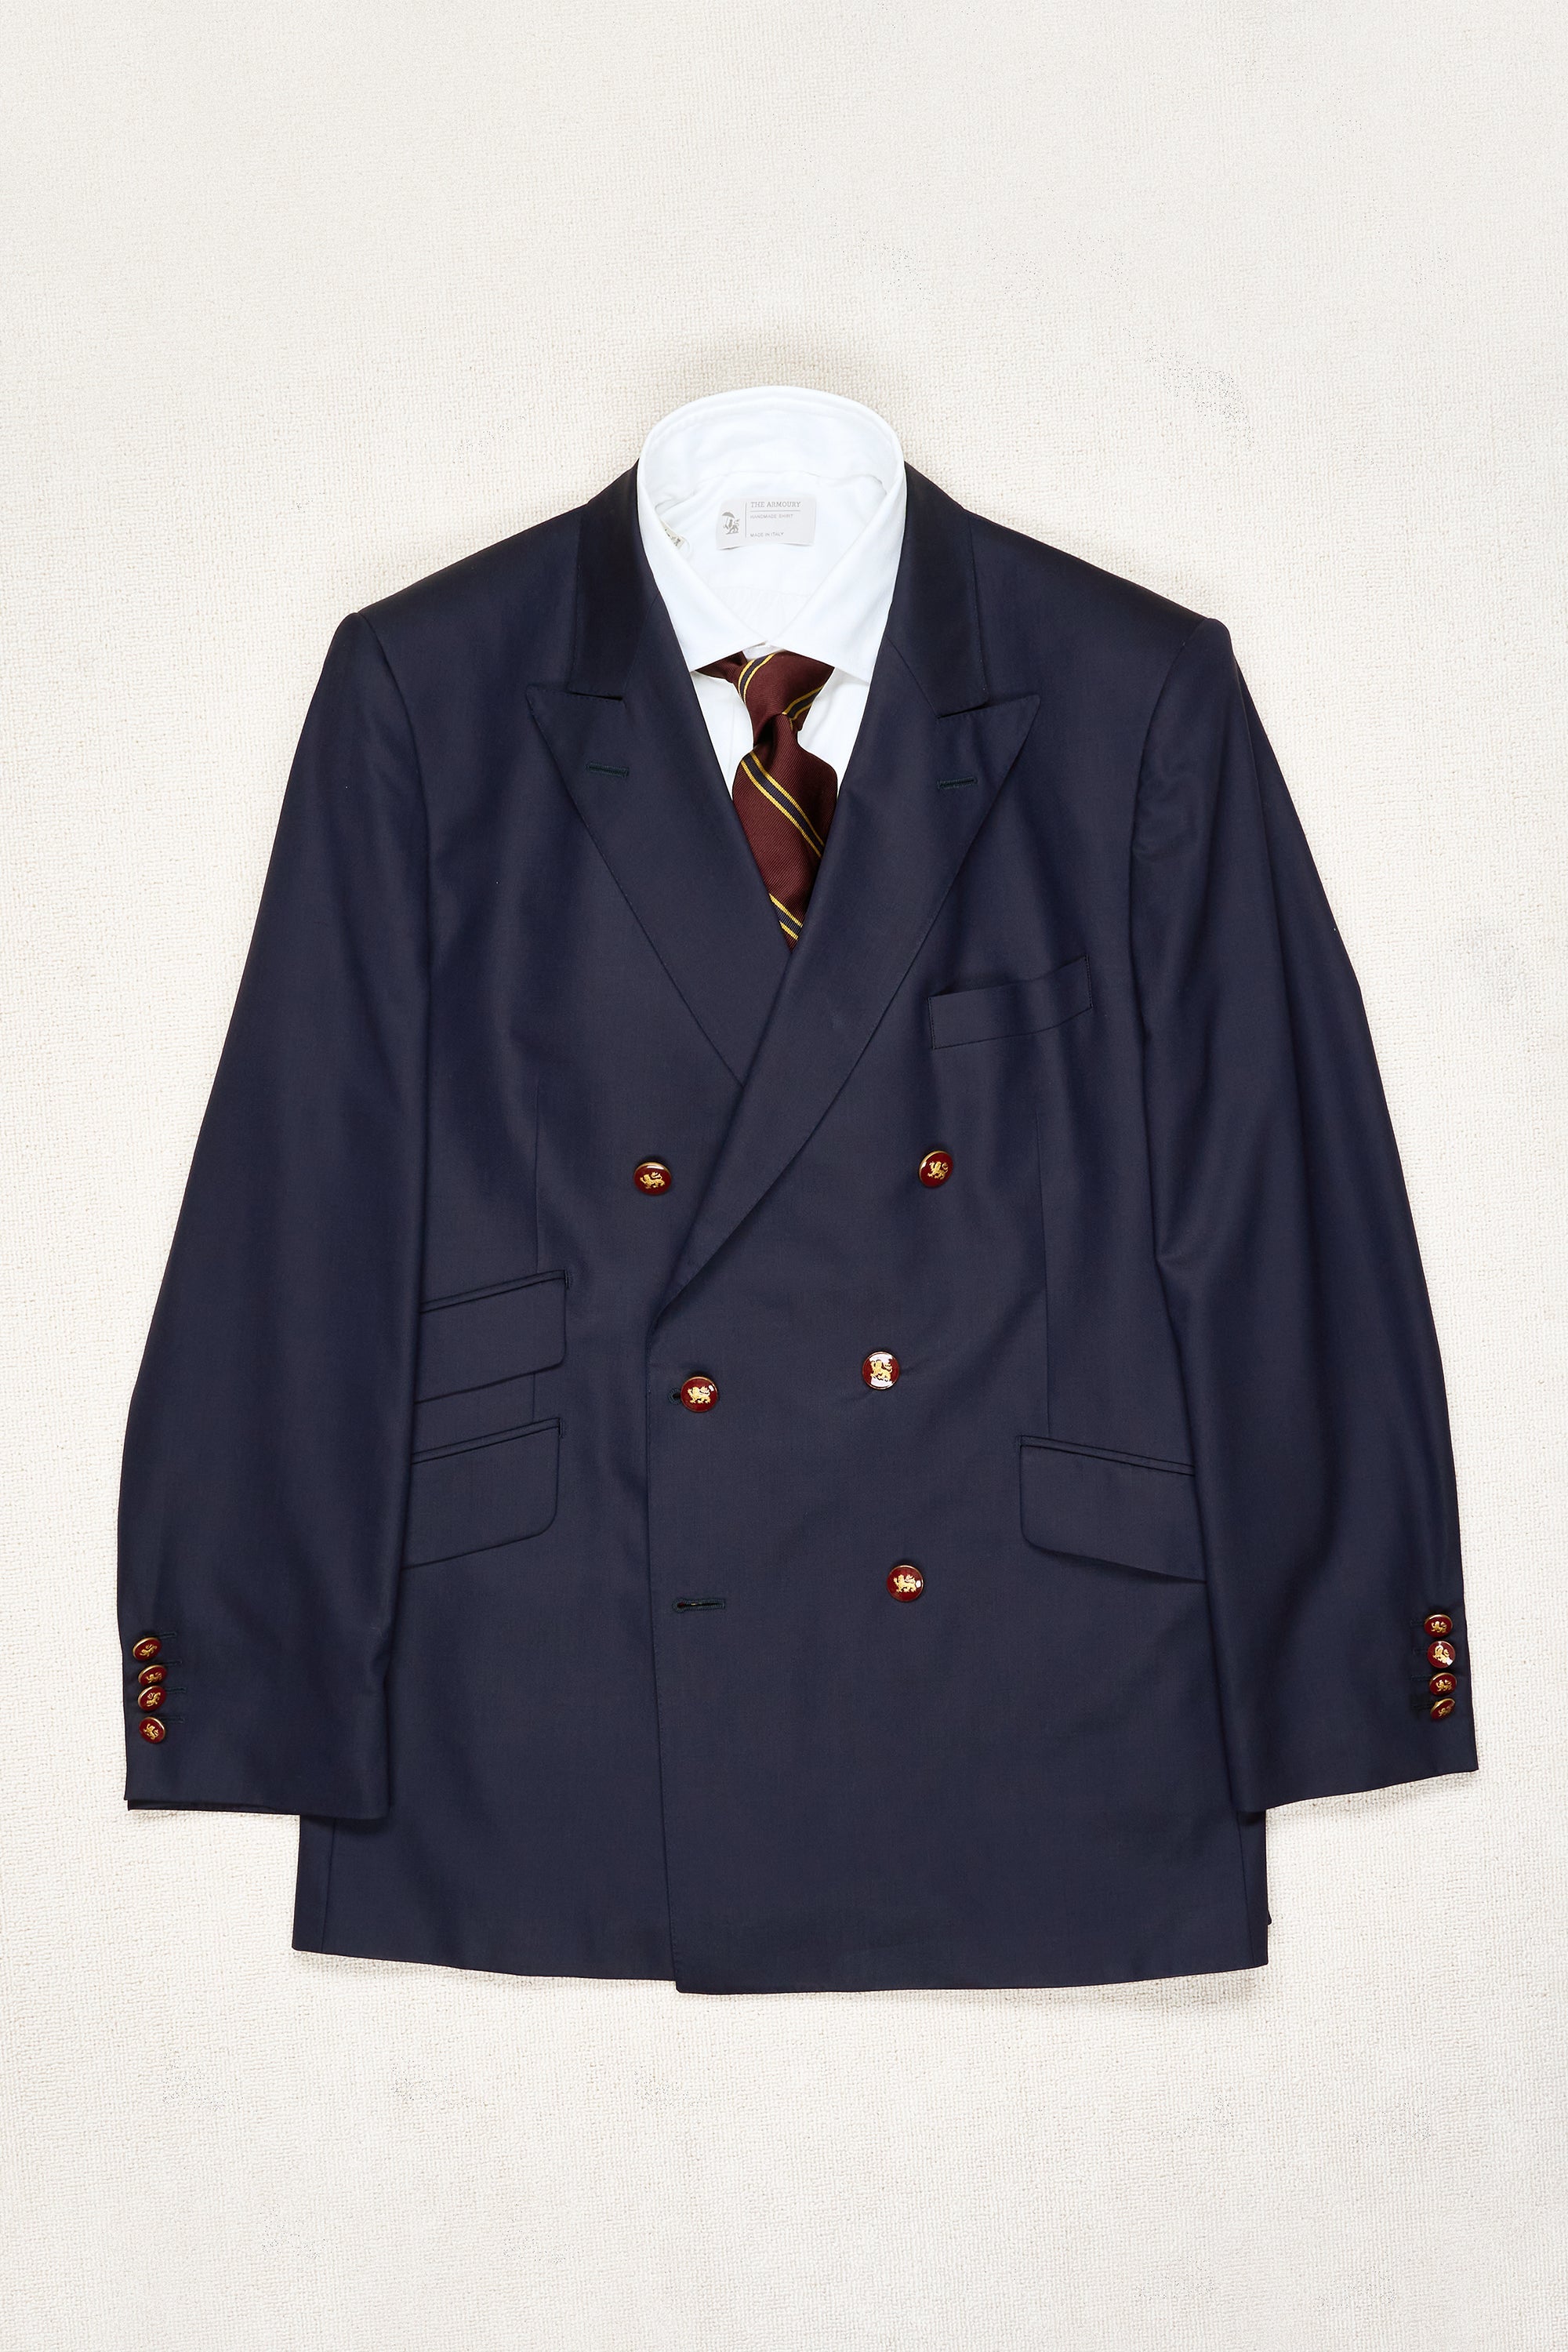 Gieves & Hawkes Navy Wool Double Breasted Sport Coat